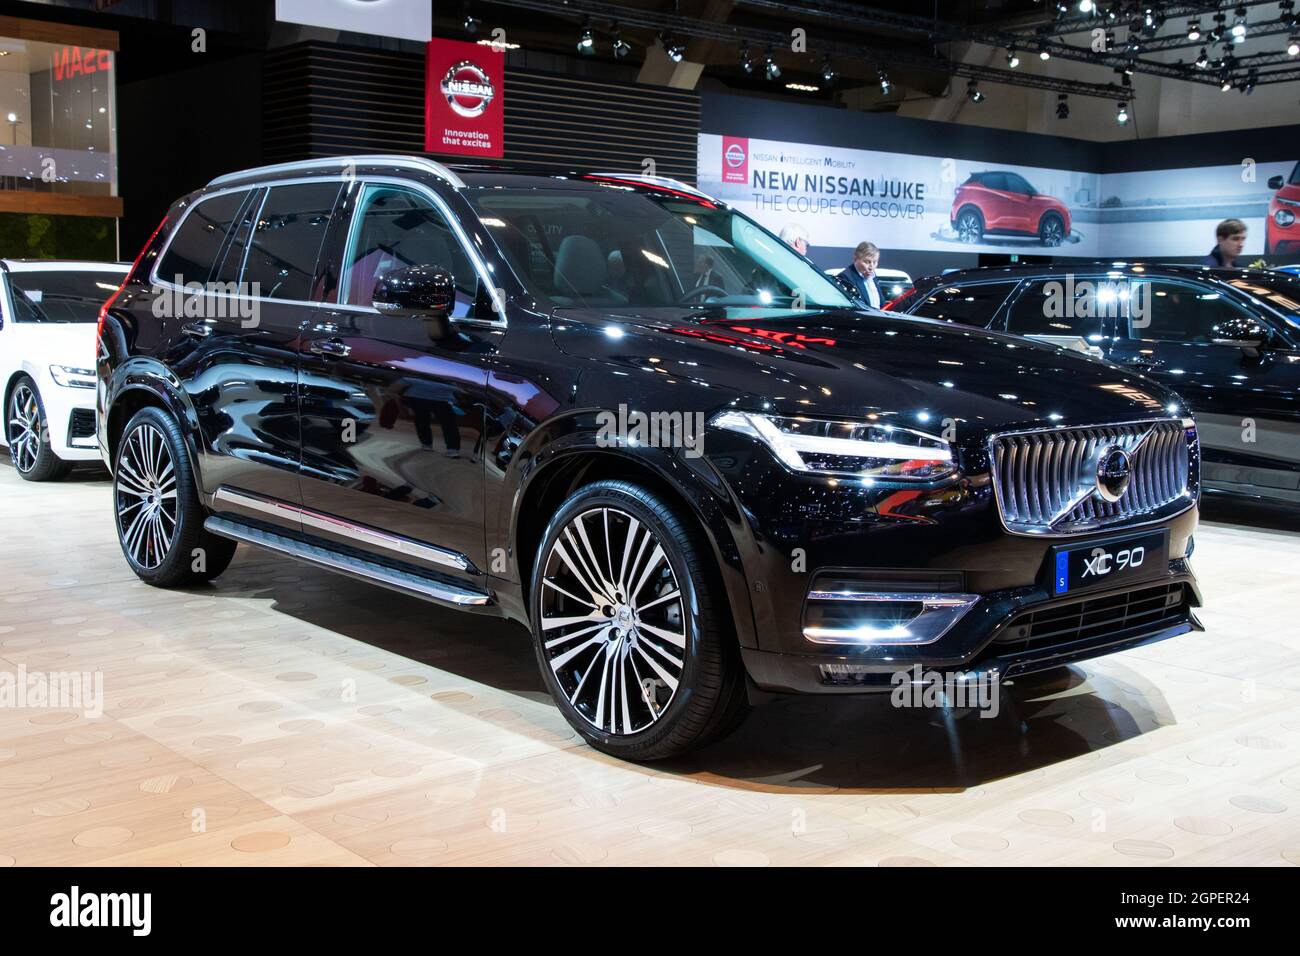 Volvo XC90 car model shown at the Autosalon 2020 Motor Show. Brussels, Belgium - January 9, 2020. Stock Photo